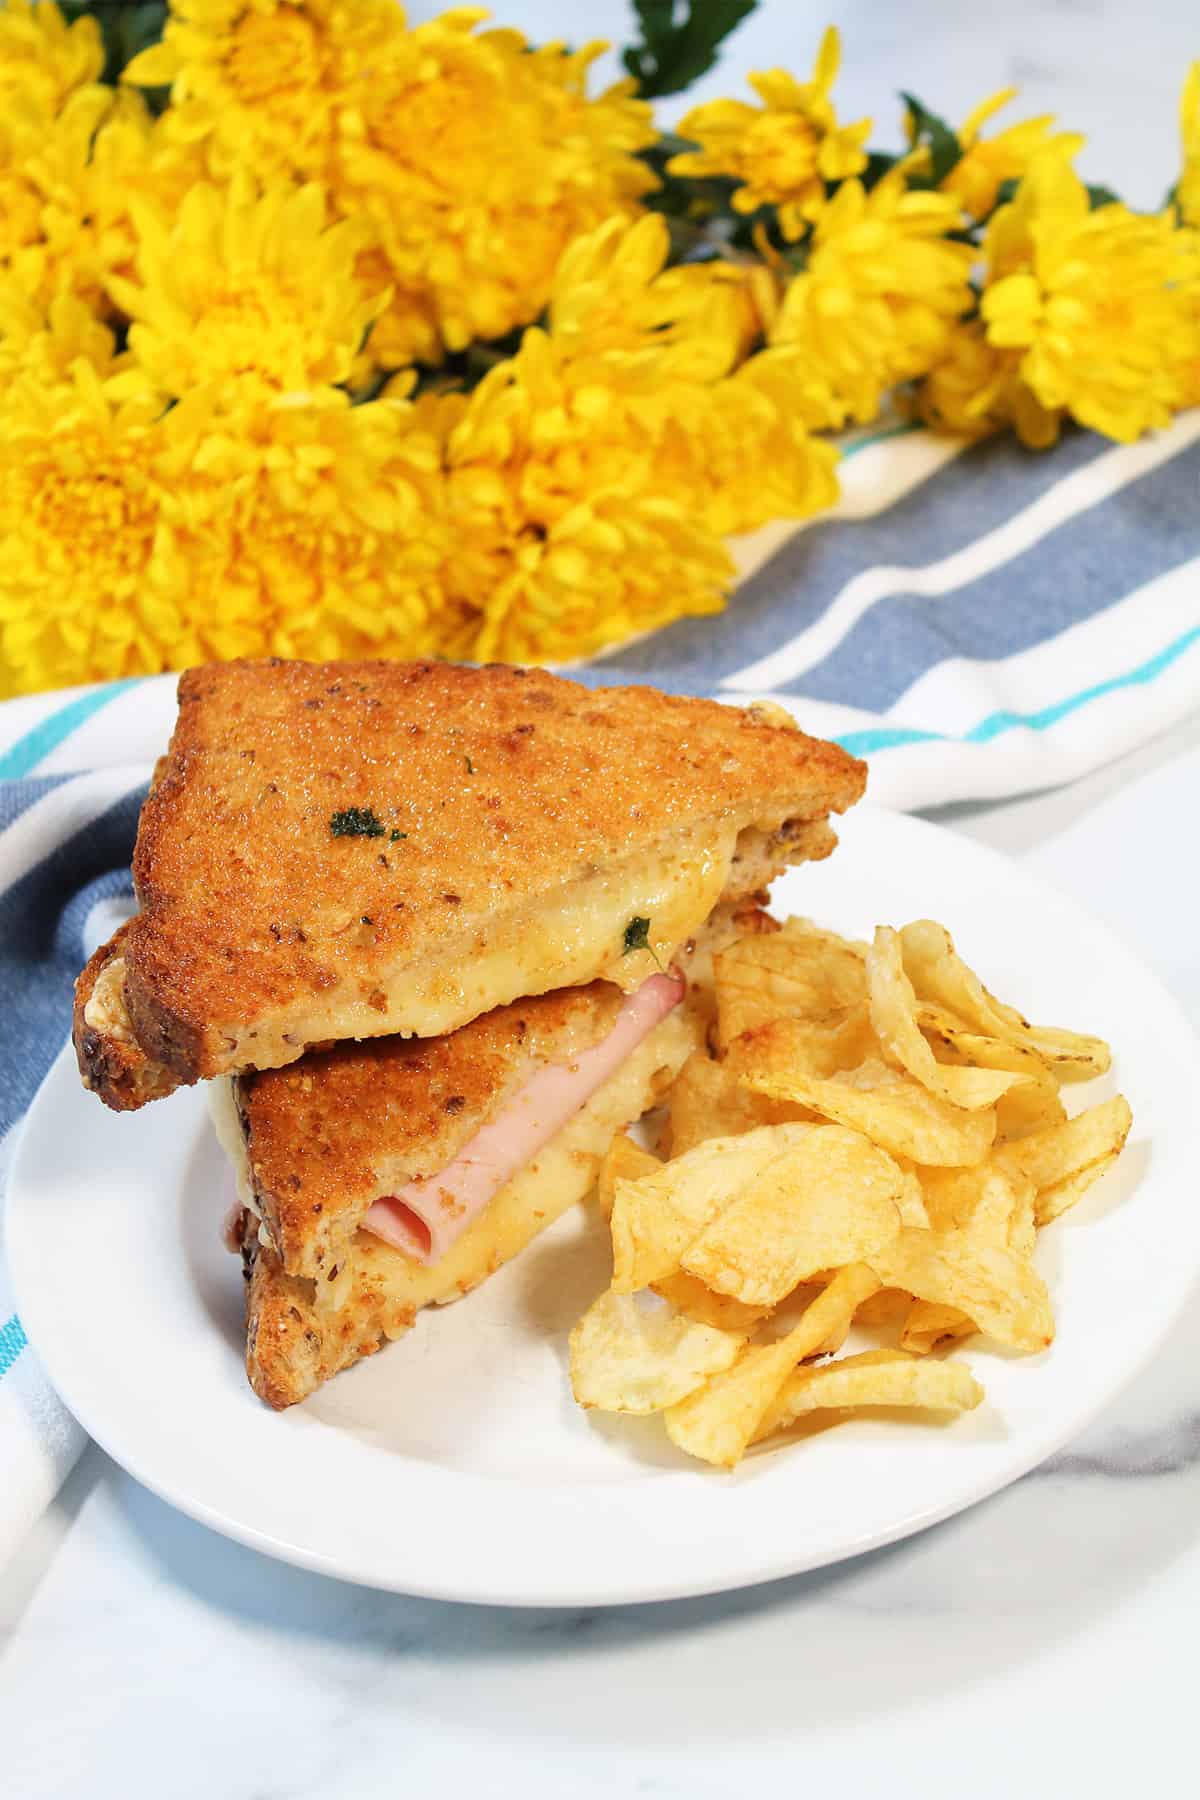 Grilled cheese sandwich with ham on white plate with potato chips.